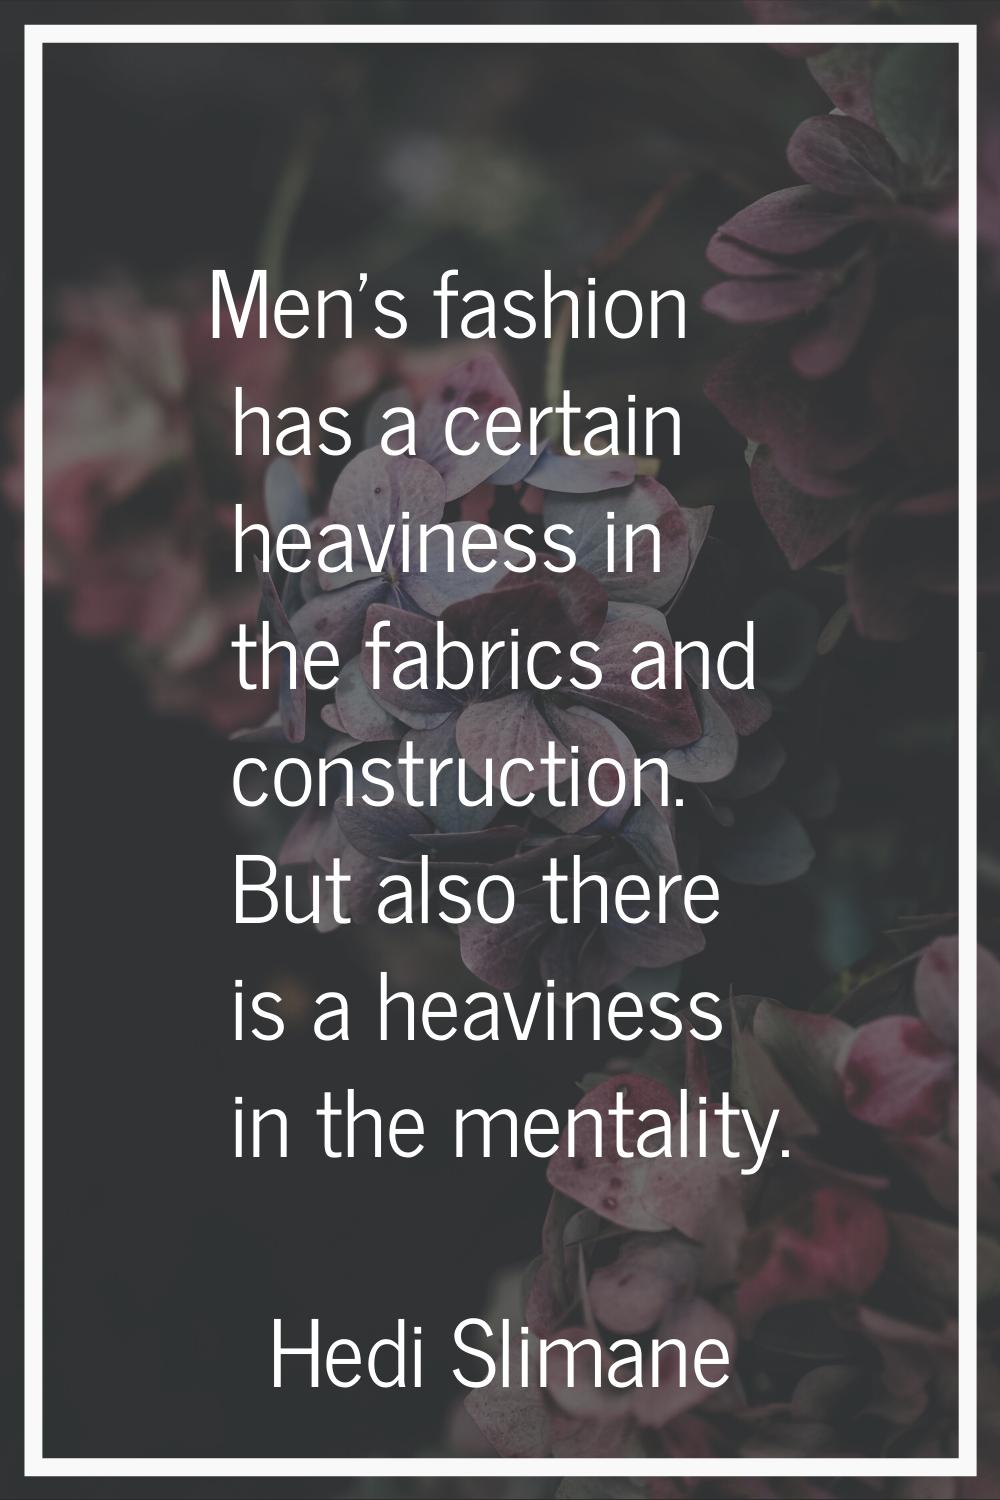 Men's fashion has a certain heaviness in the fabrics and construction. But also there is a heavines